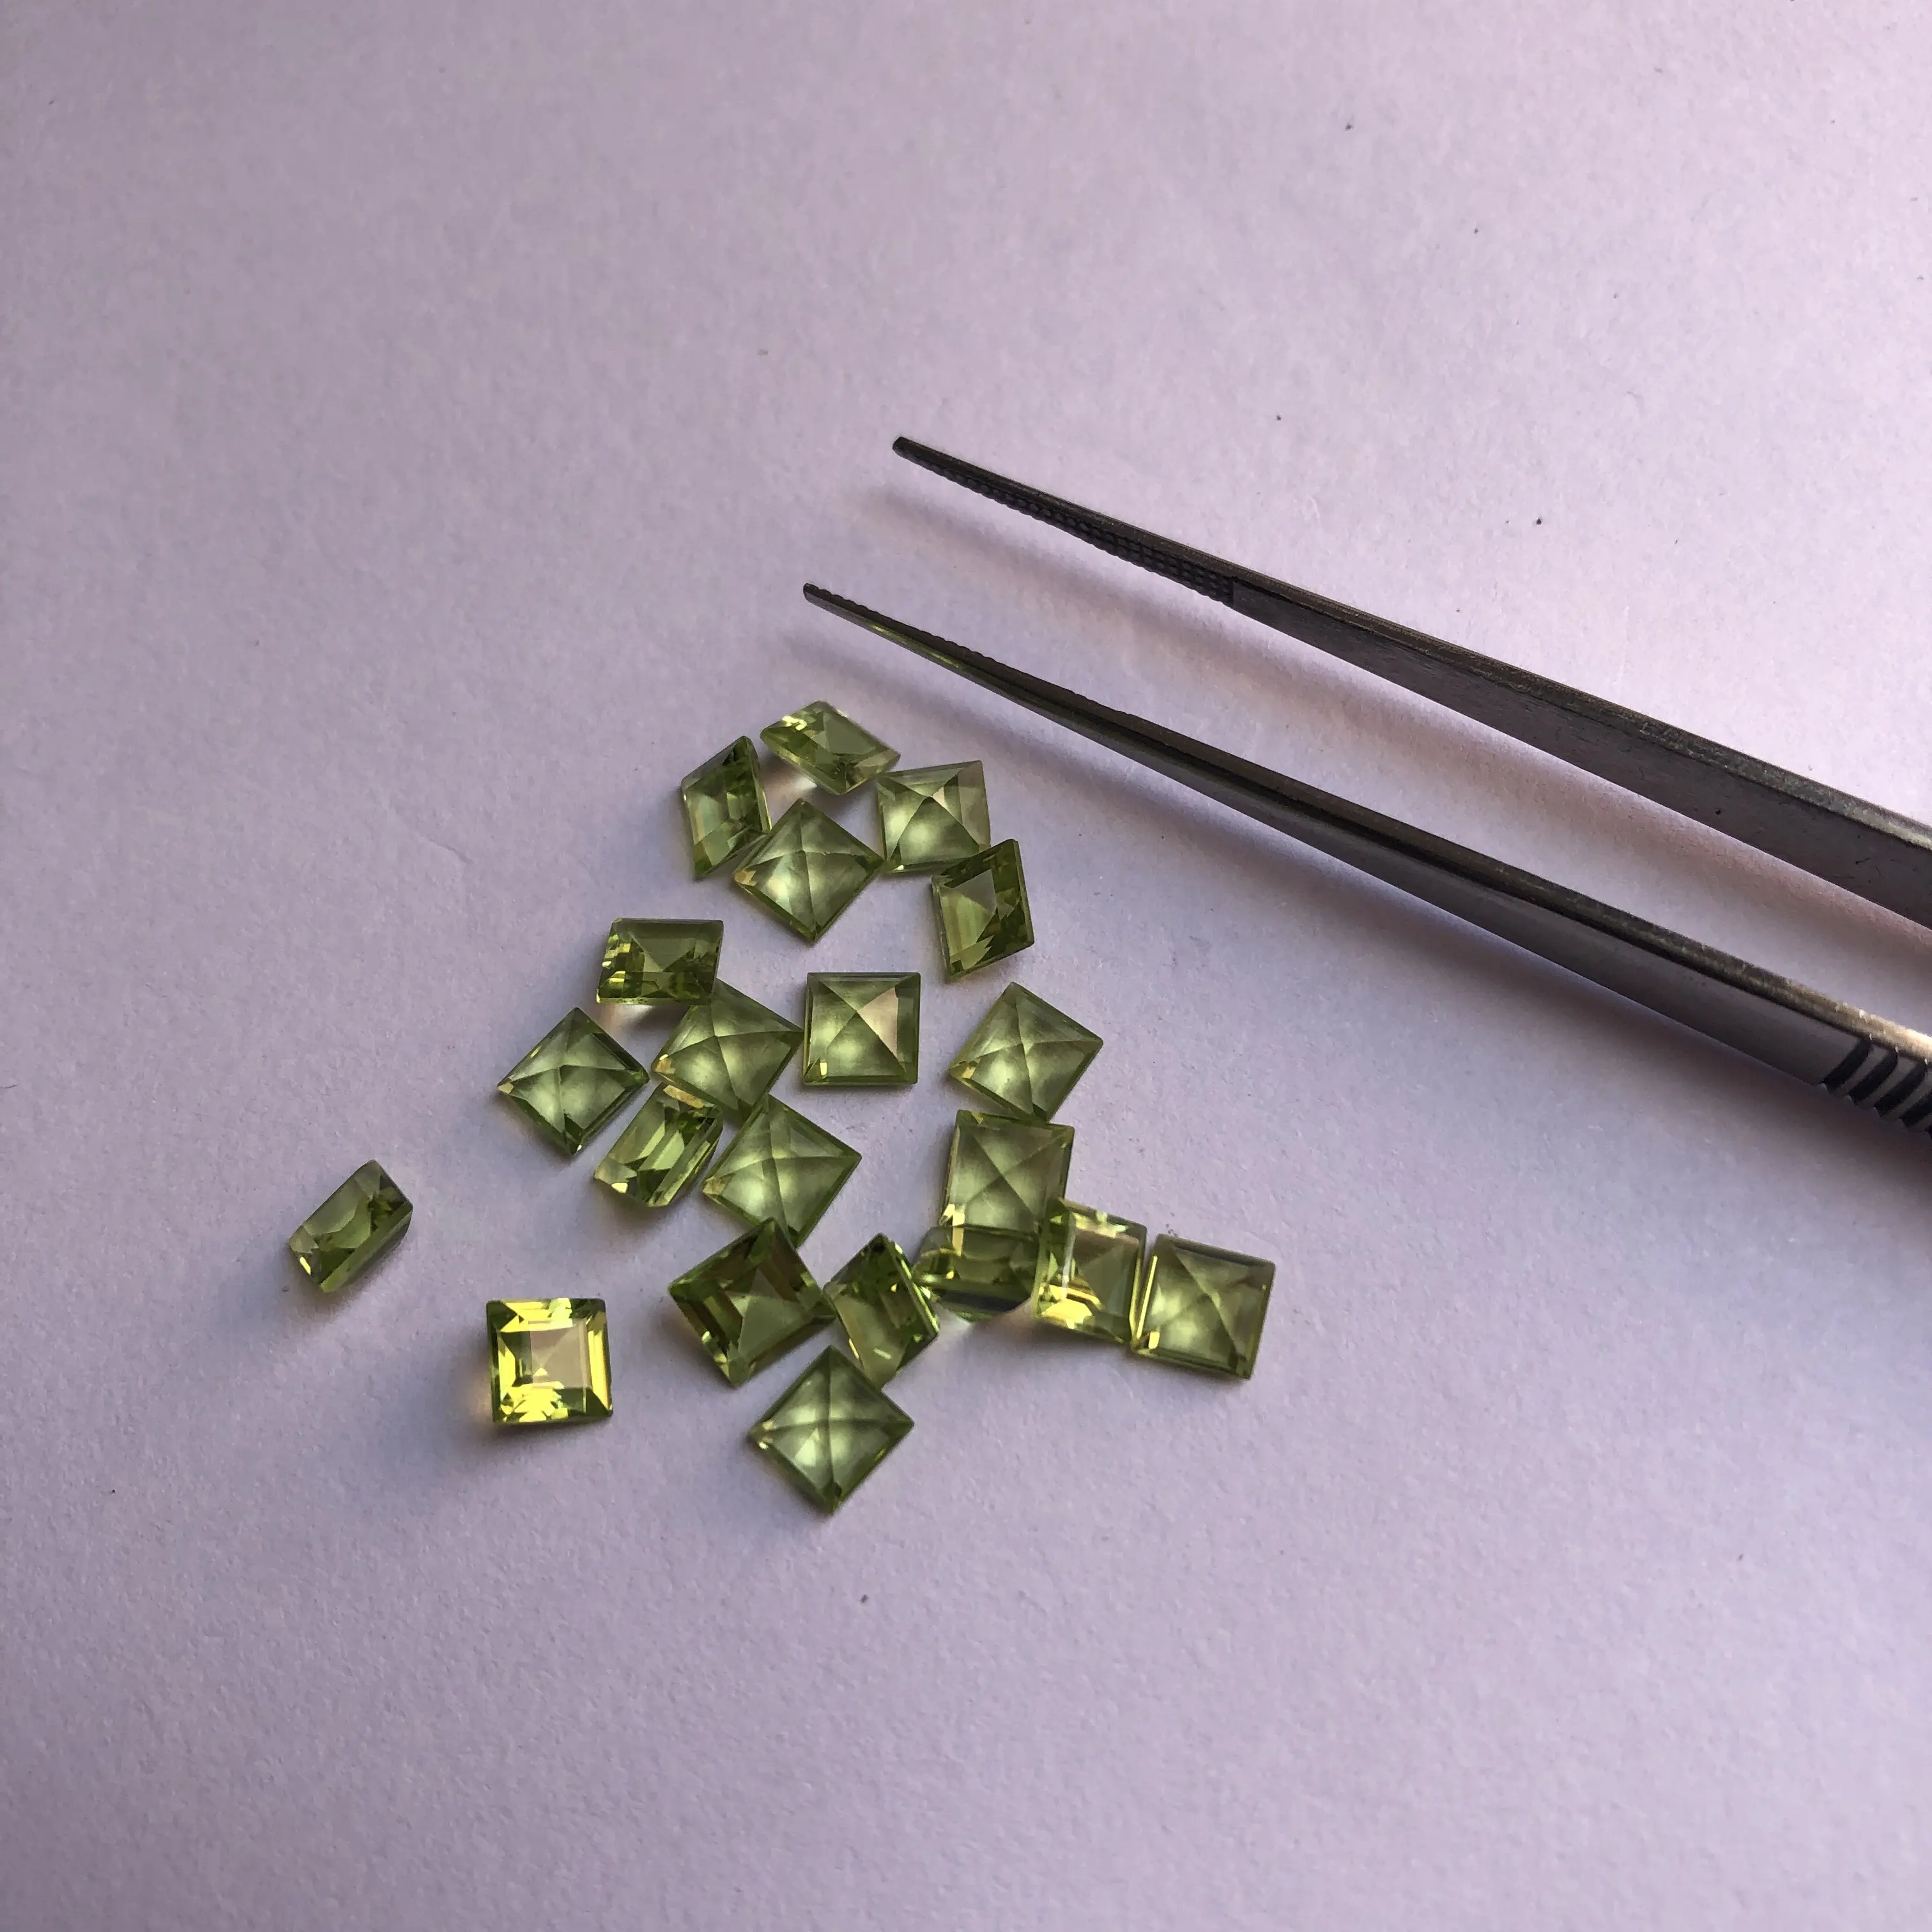 4mm Natural Peridot Square Cut Loose Gemstone Manufacturer Factory Wholesale Price Stones for Buy Jewelry Making Online Shop Now